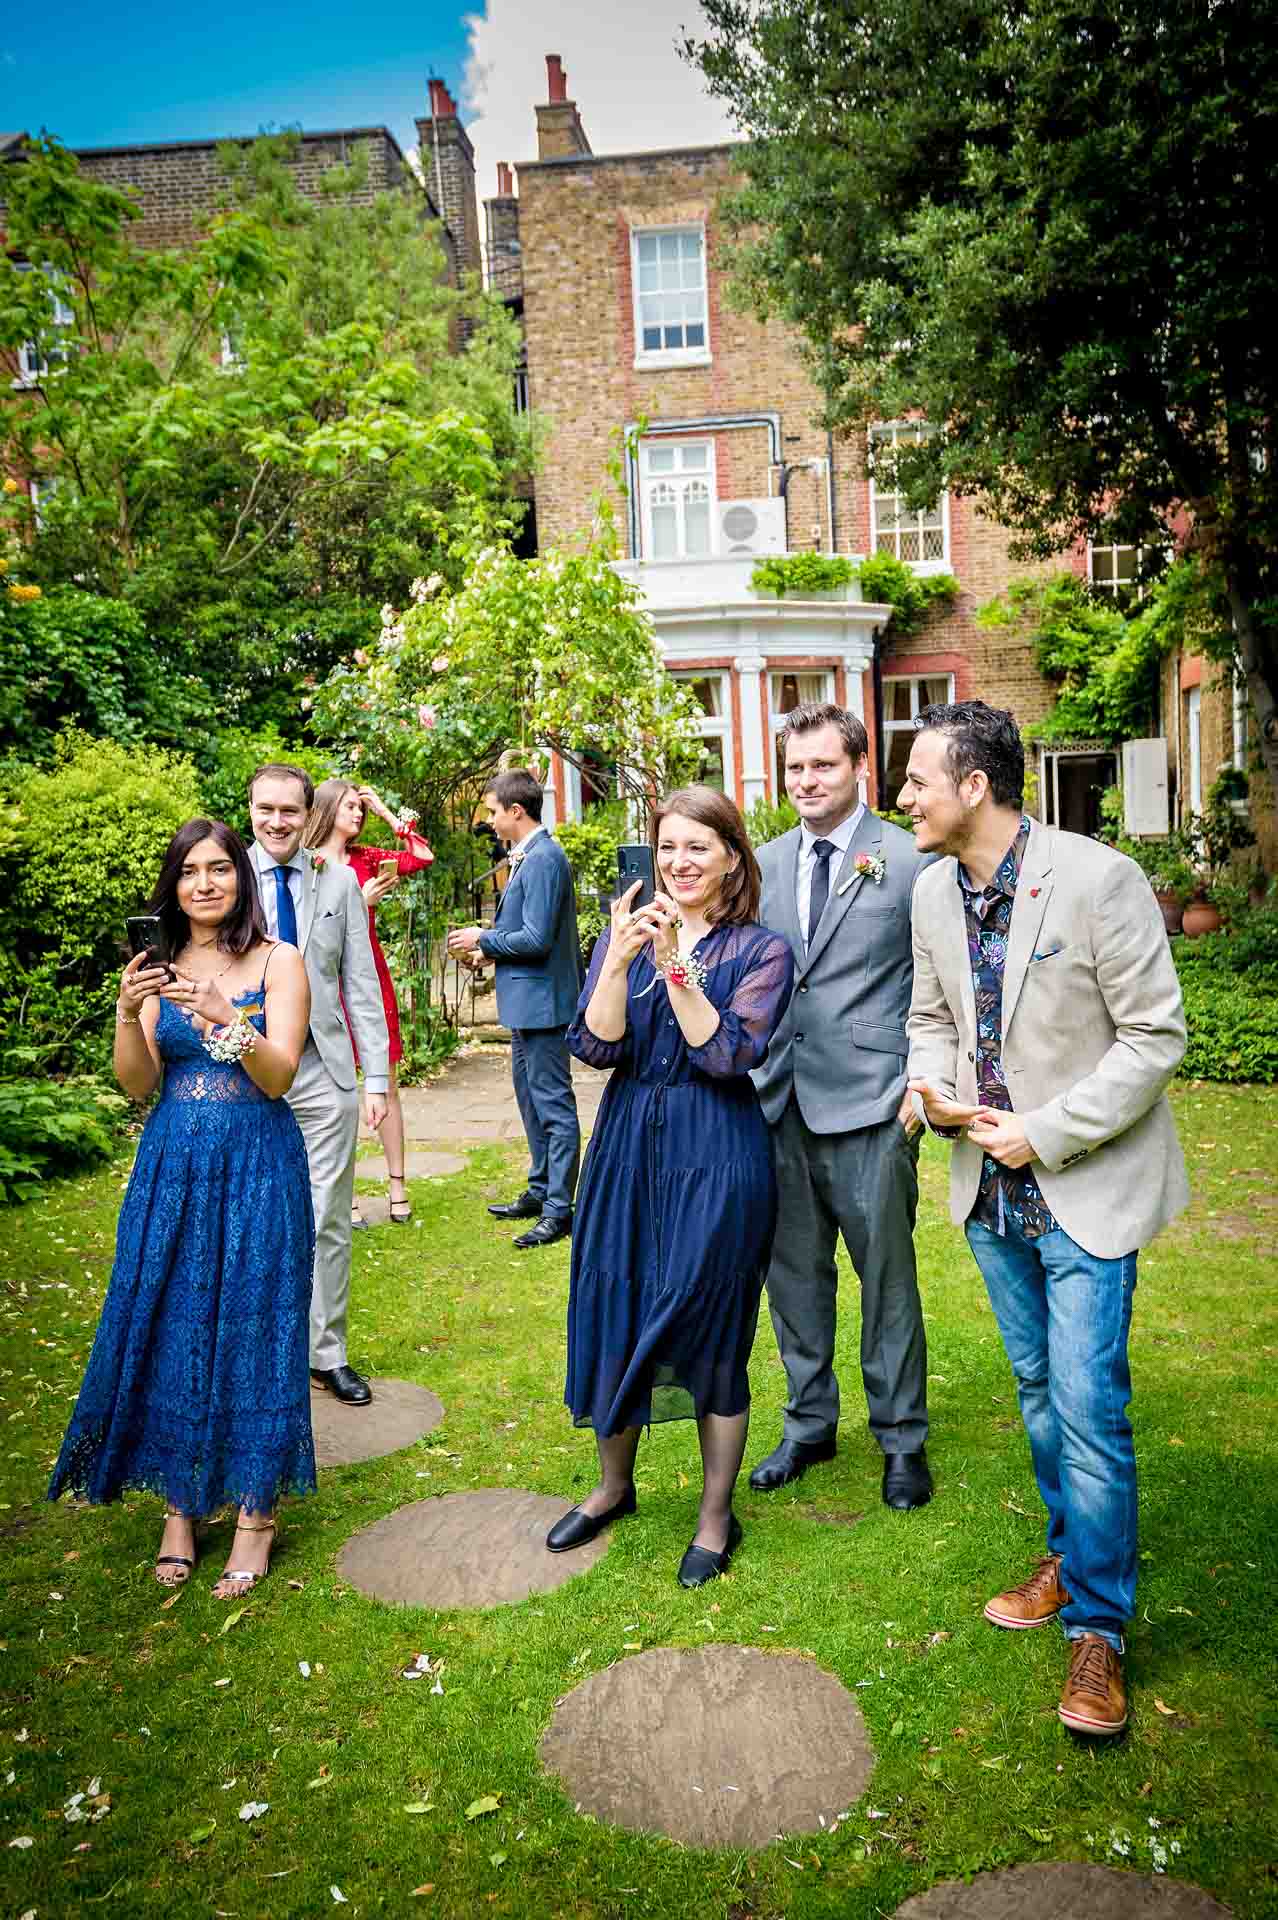 Guests taking photos in garden at wedding in Southwark Registry Office